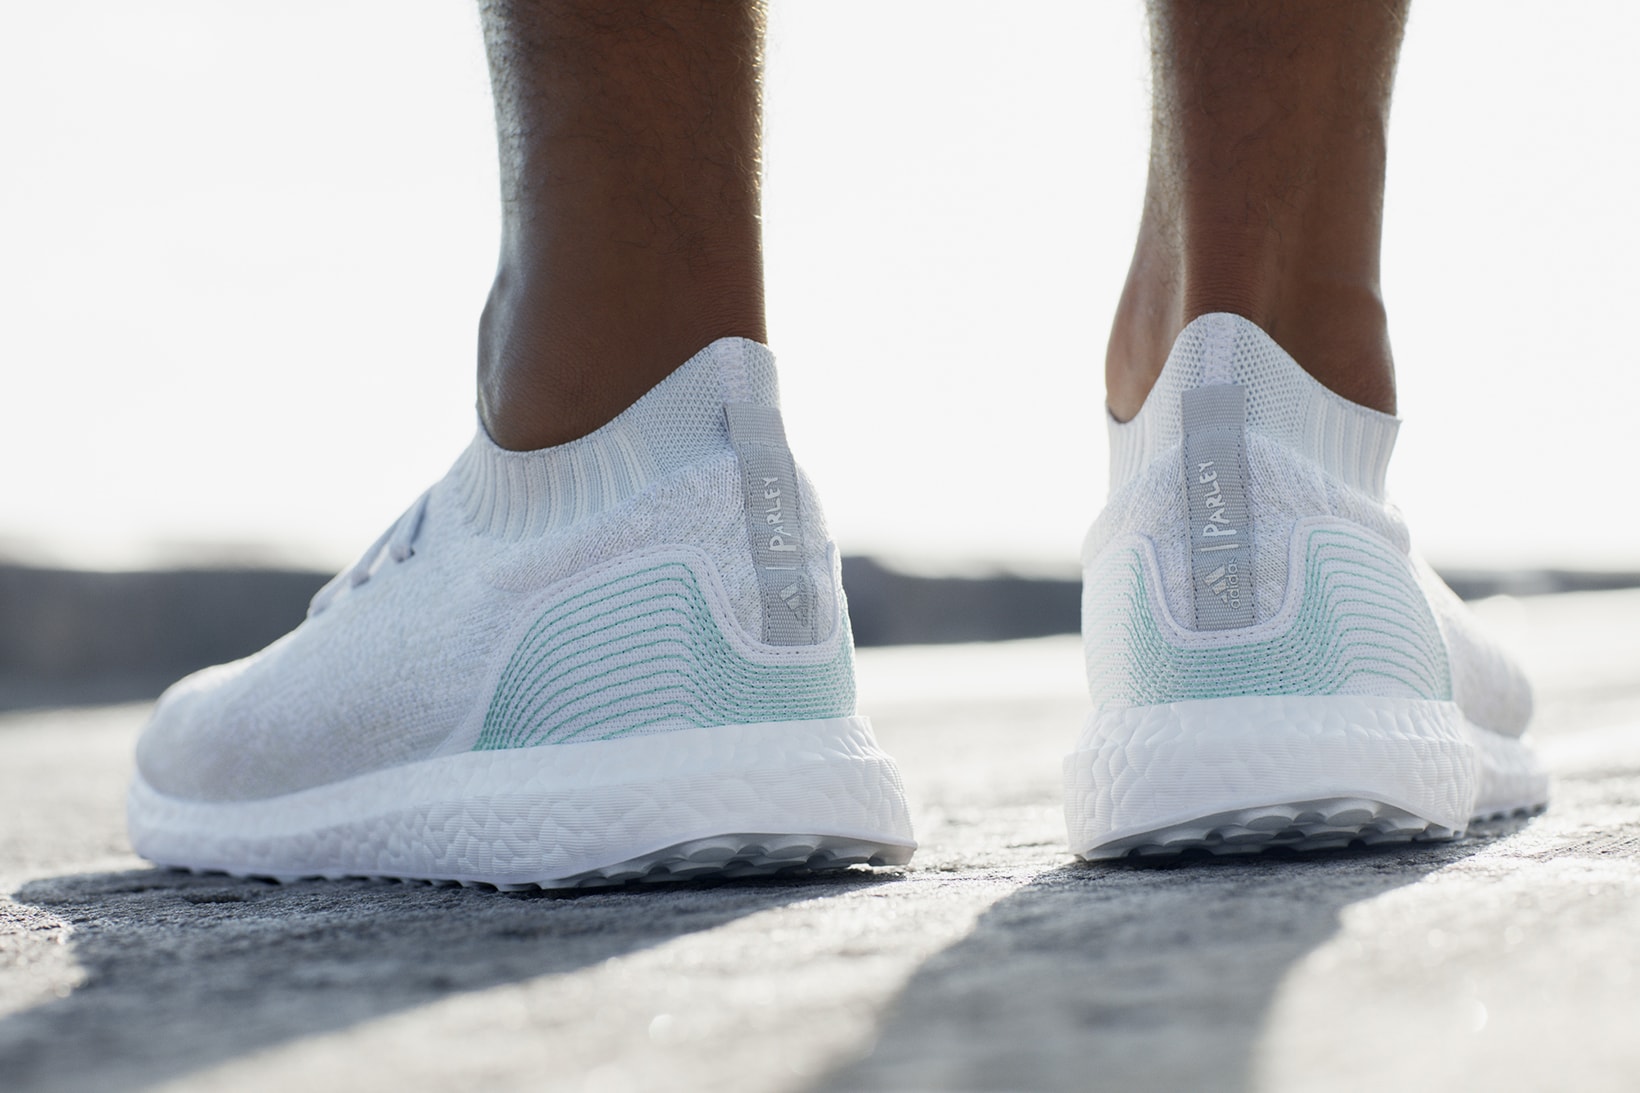 Parley for the Oceans x adidas Ultra Boost Uncaged & Football